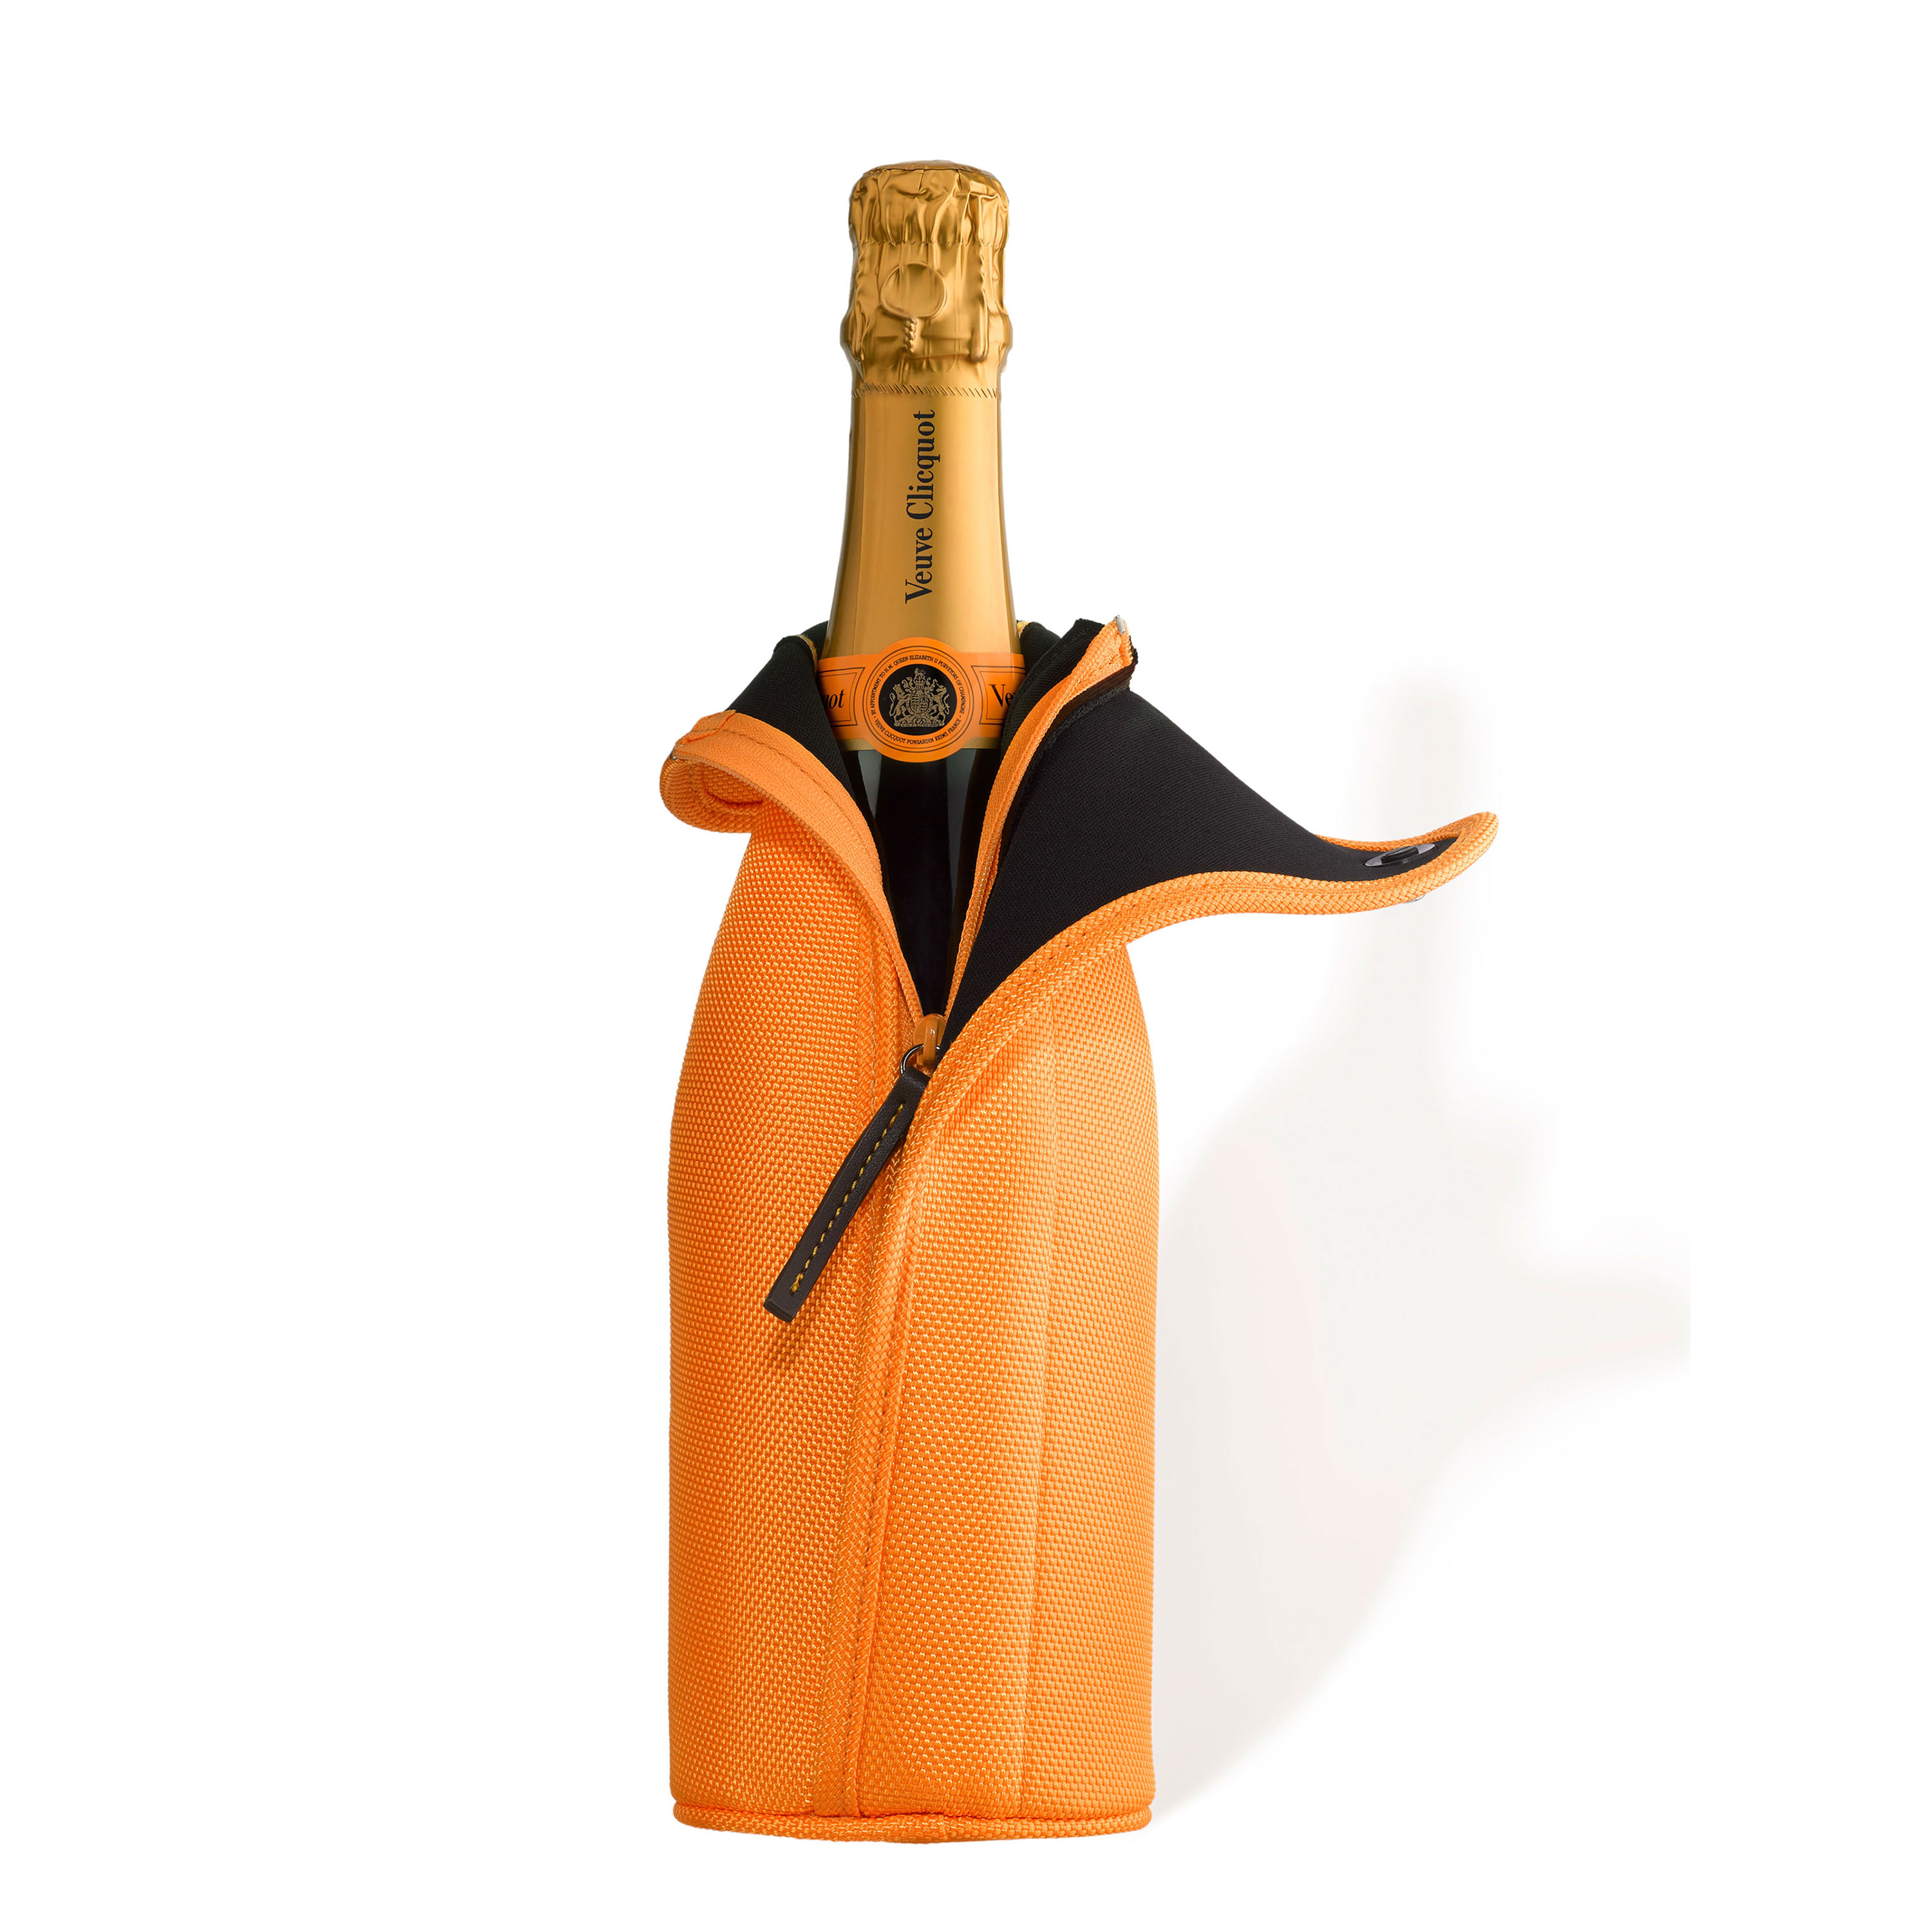 Where to buy Veuve Clicquot Ponsardin with Ice Jacket, Champagne